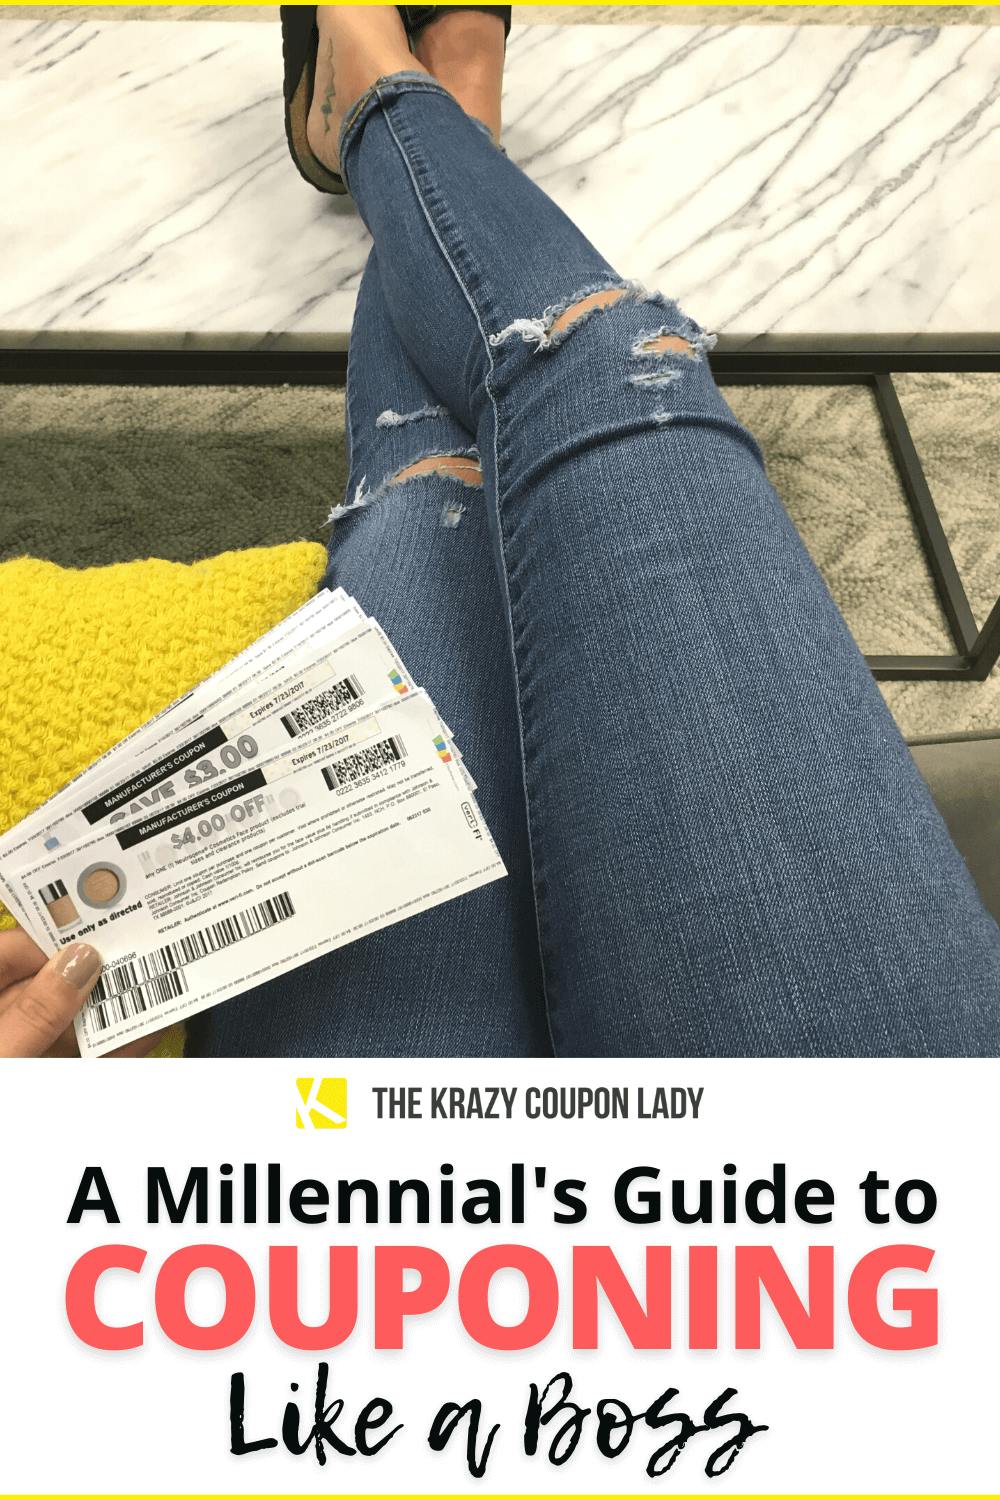 A Millennial's Guide to Couponing (Like a Boss)